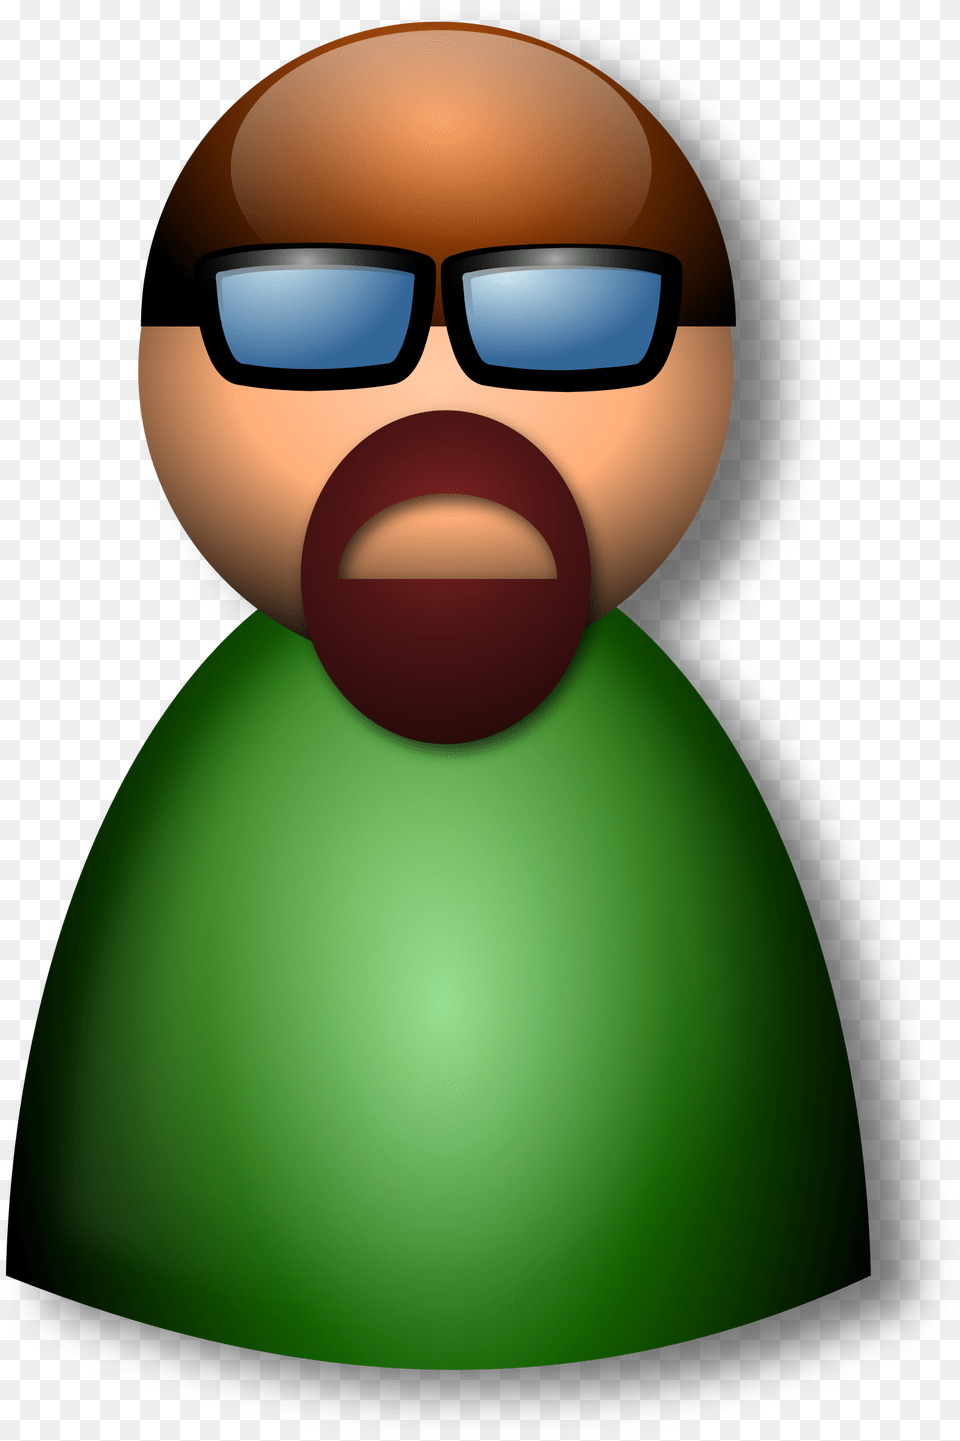 User Icon Remix Clip Arts Bald And Beard With Sun Glasses, Green, Sphere, Accessories, Face Free Transparent Png